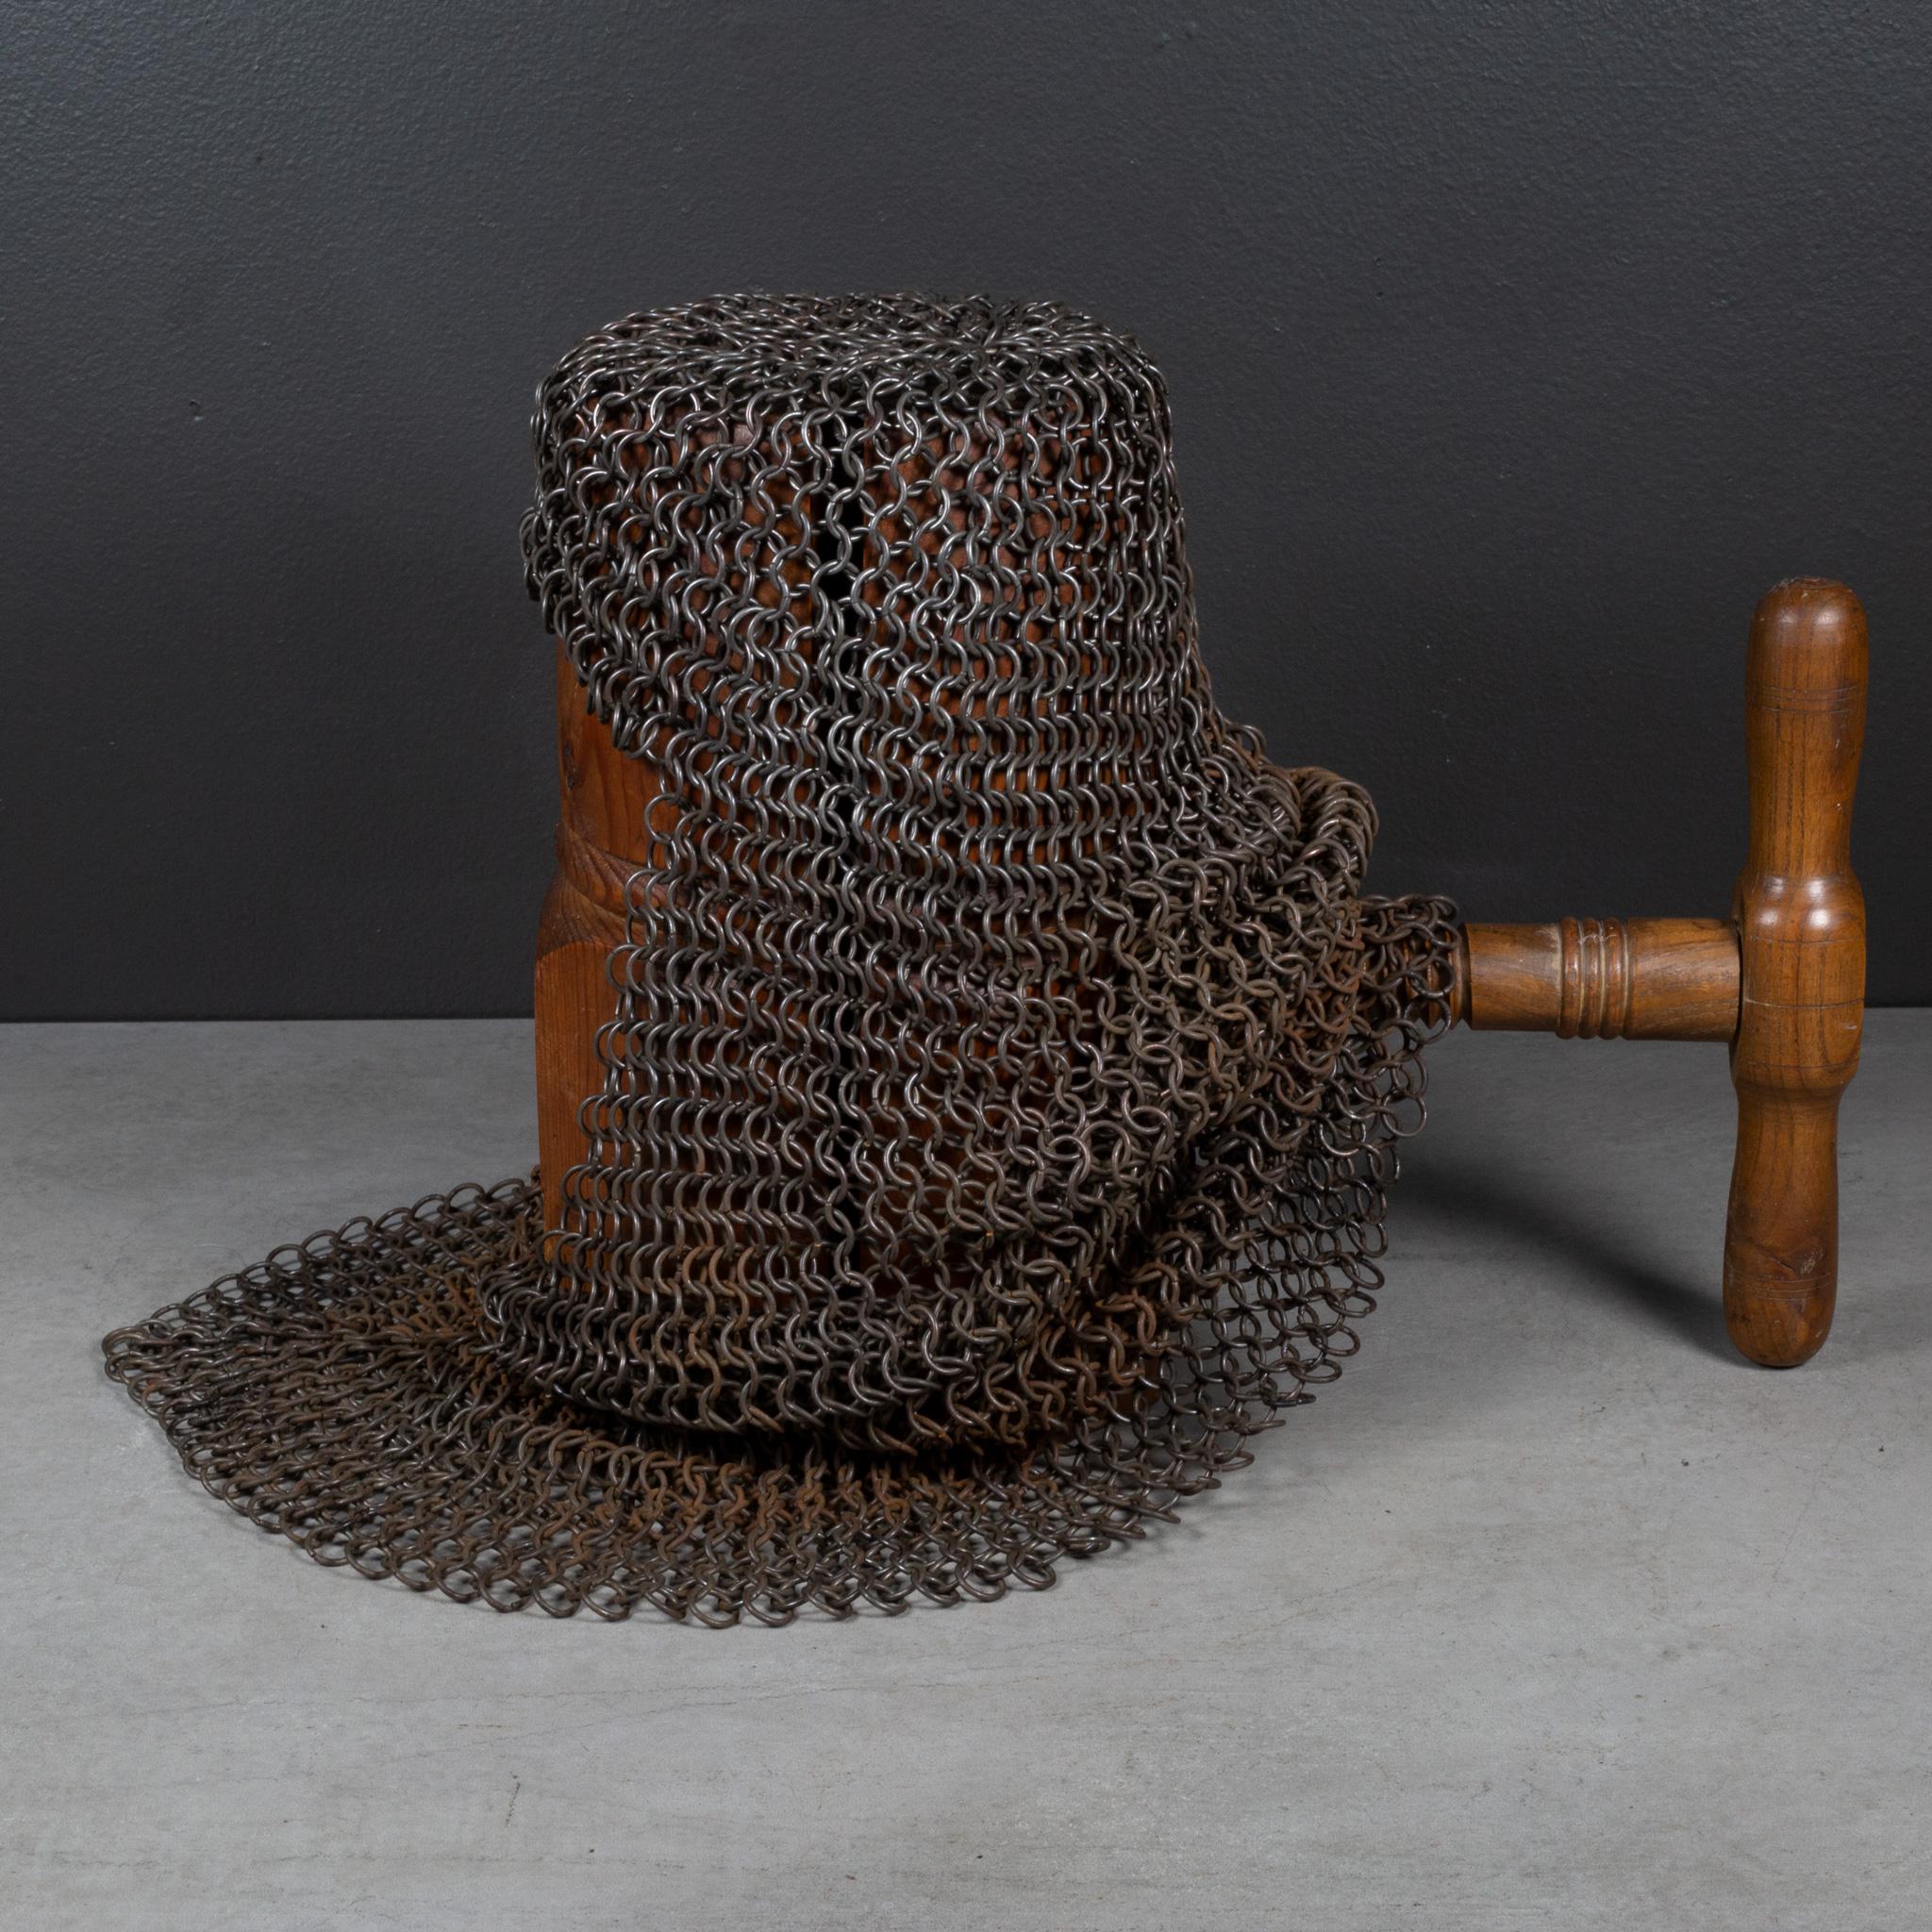 ﻿ABOUT

A vintage chainmail head cover.  Hat block not included.

    CREATOR Unknown.
    DATE OF MANUFACTURE 20th c.
    MATERIALS AND TECHNIQUES Metal.
    CONDITION Good. Wear consistent with age and use. No breaks. Rust in some areas.
   